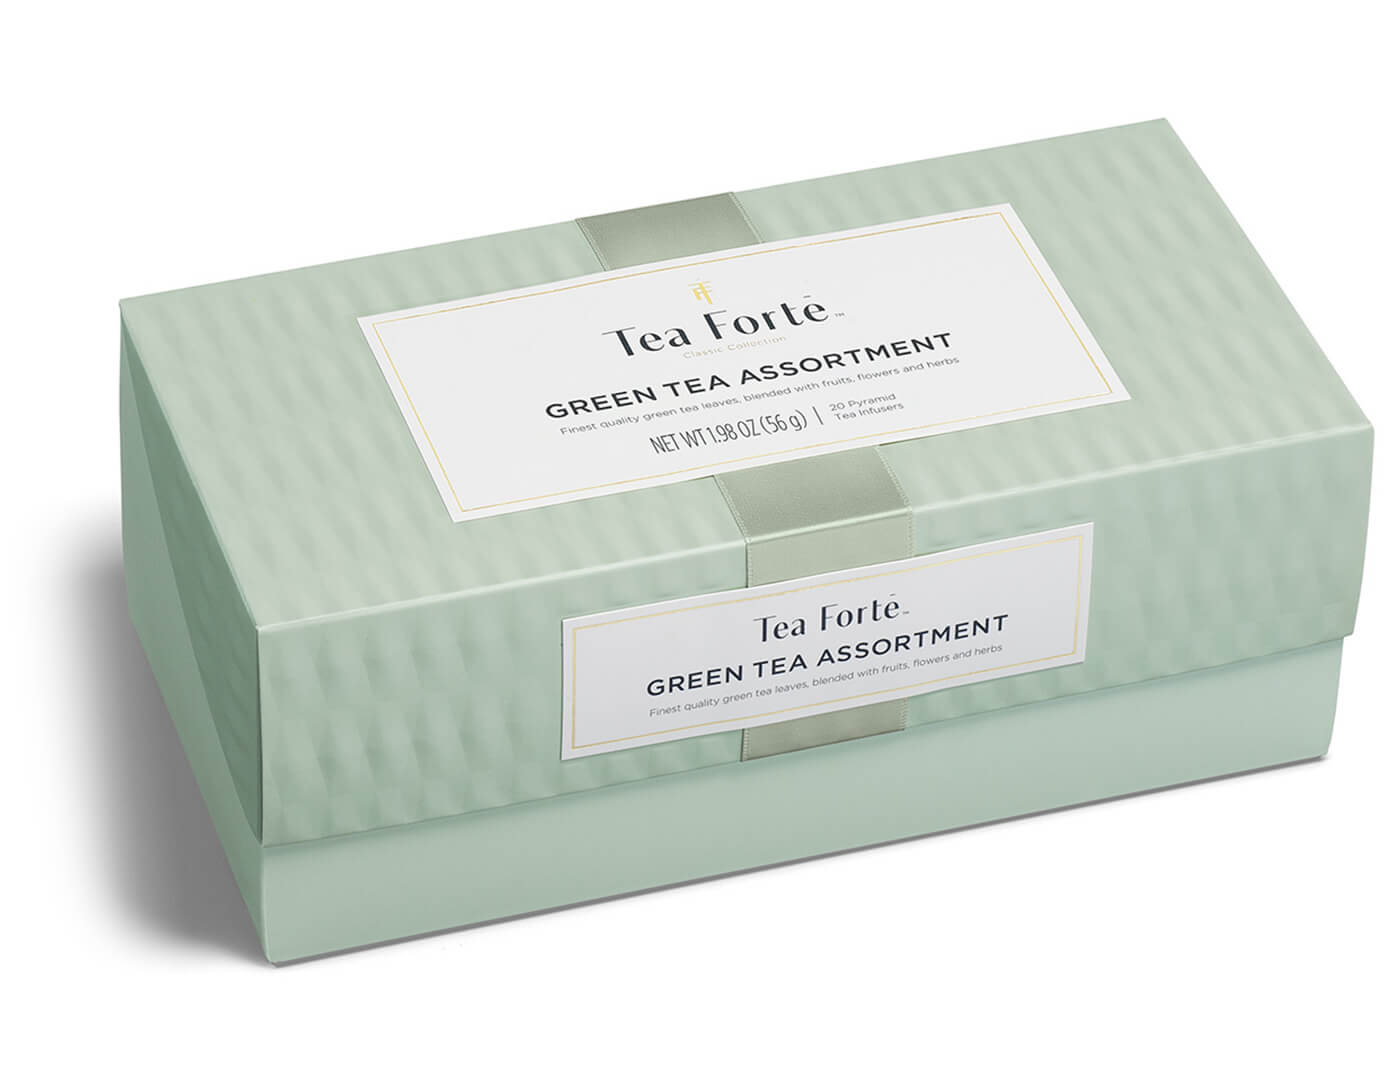 Green tea assortment in a 20 count presentation box with lid closed